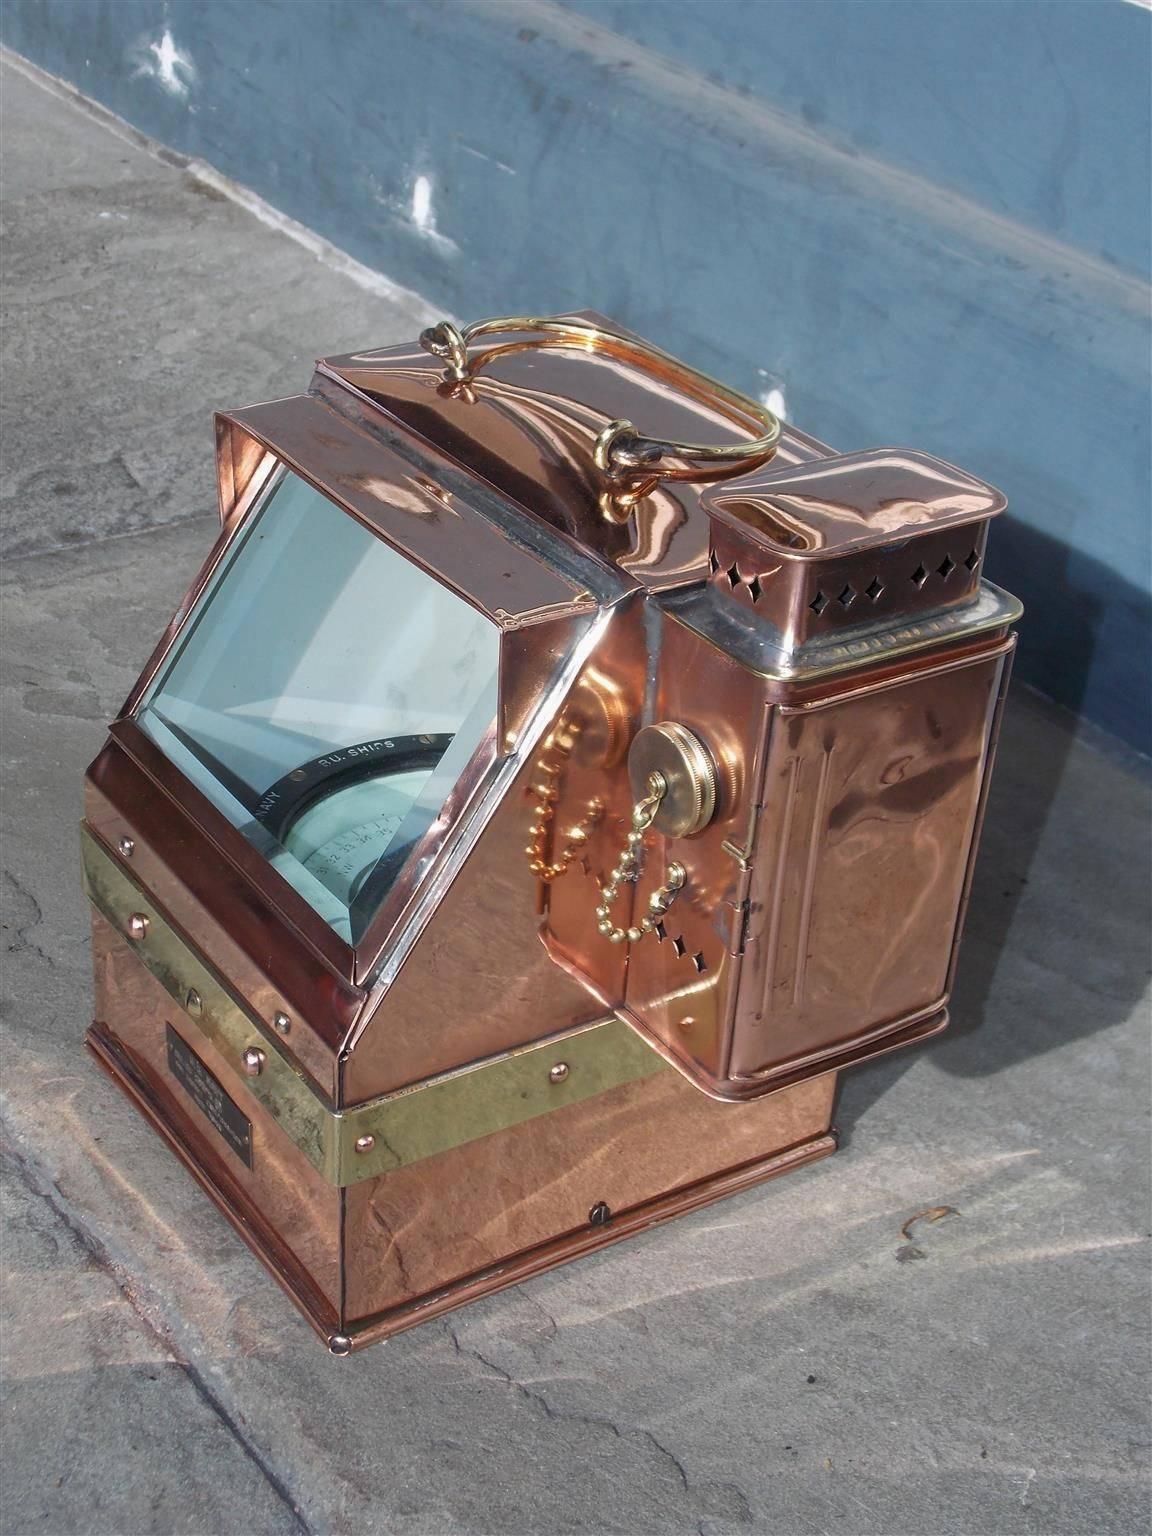 American solid copper and brass Navy ships binnacle with interior mounted compass, brass carrying handle, side mounted kerosene lantern, rear mounting bracket and brass plate inscribed “U.S. NAVY / BU. OF SHIPS / THE LIONEL CORPORATION / NEW YORK”.